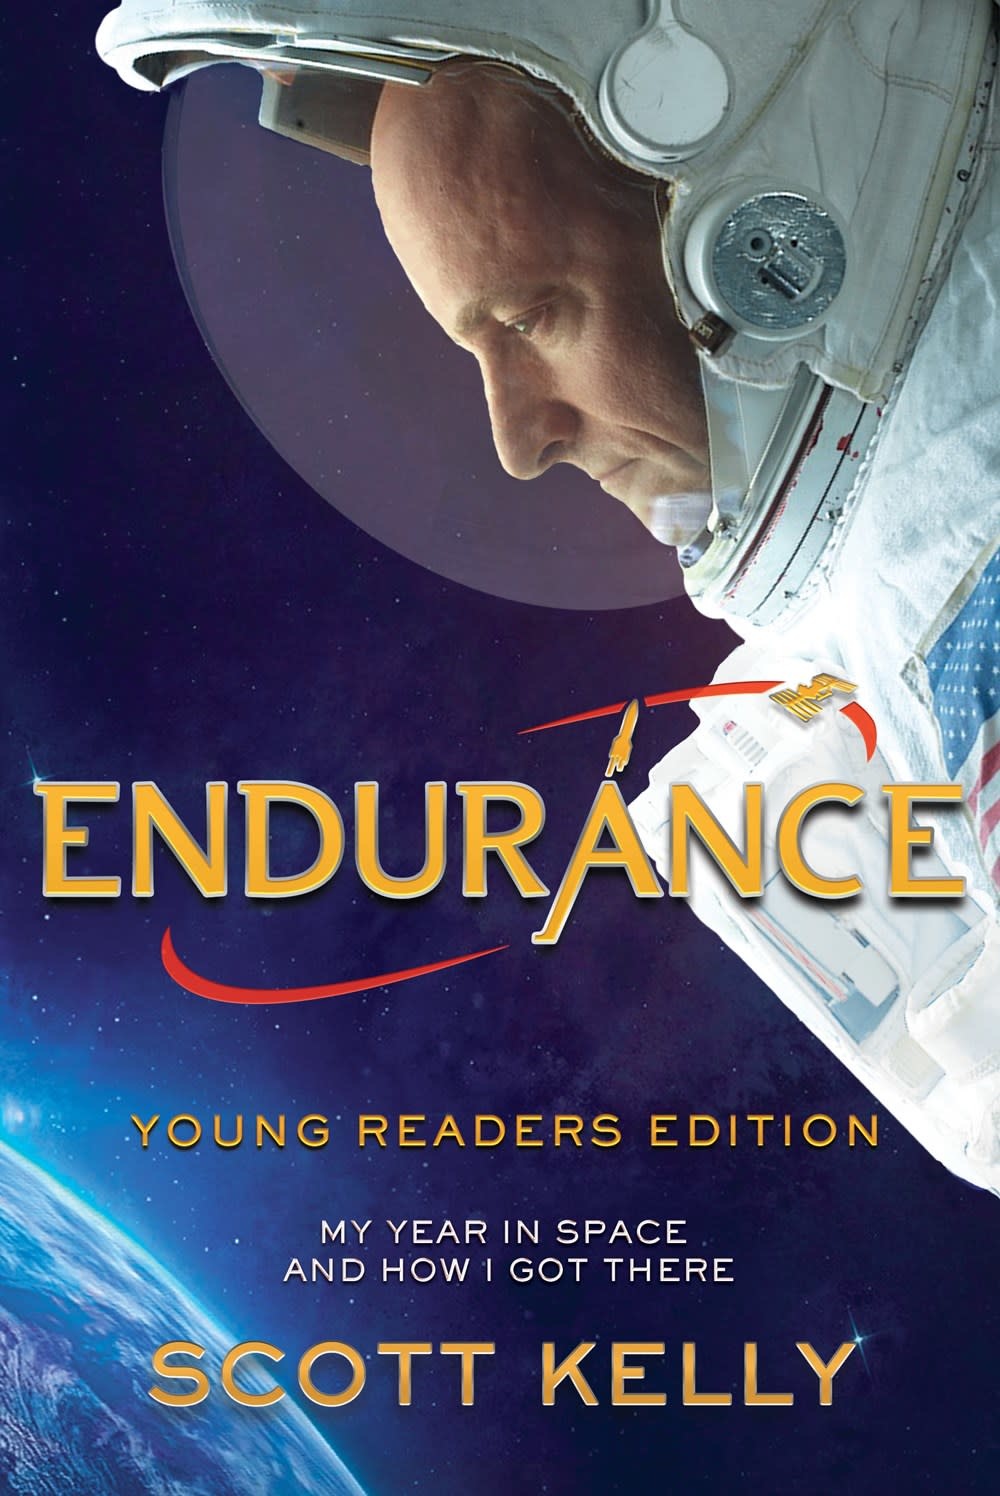 Yearling Endurance: My Year in Space (Young Readers Ed.) [Scott Kelly]